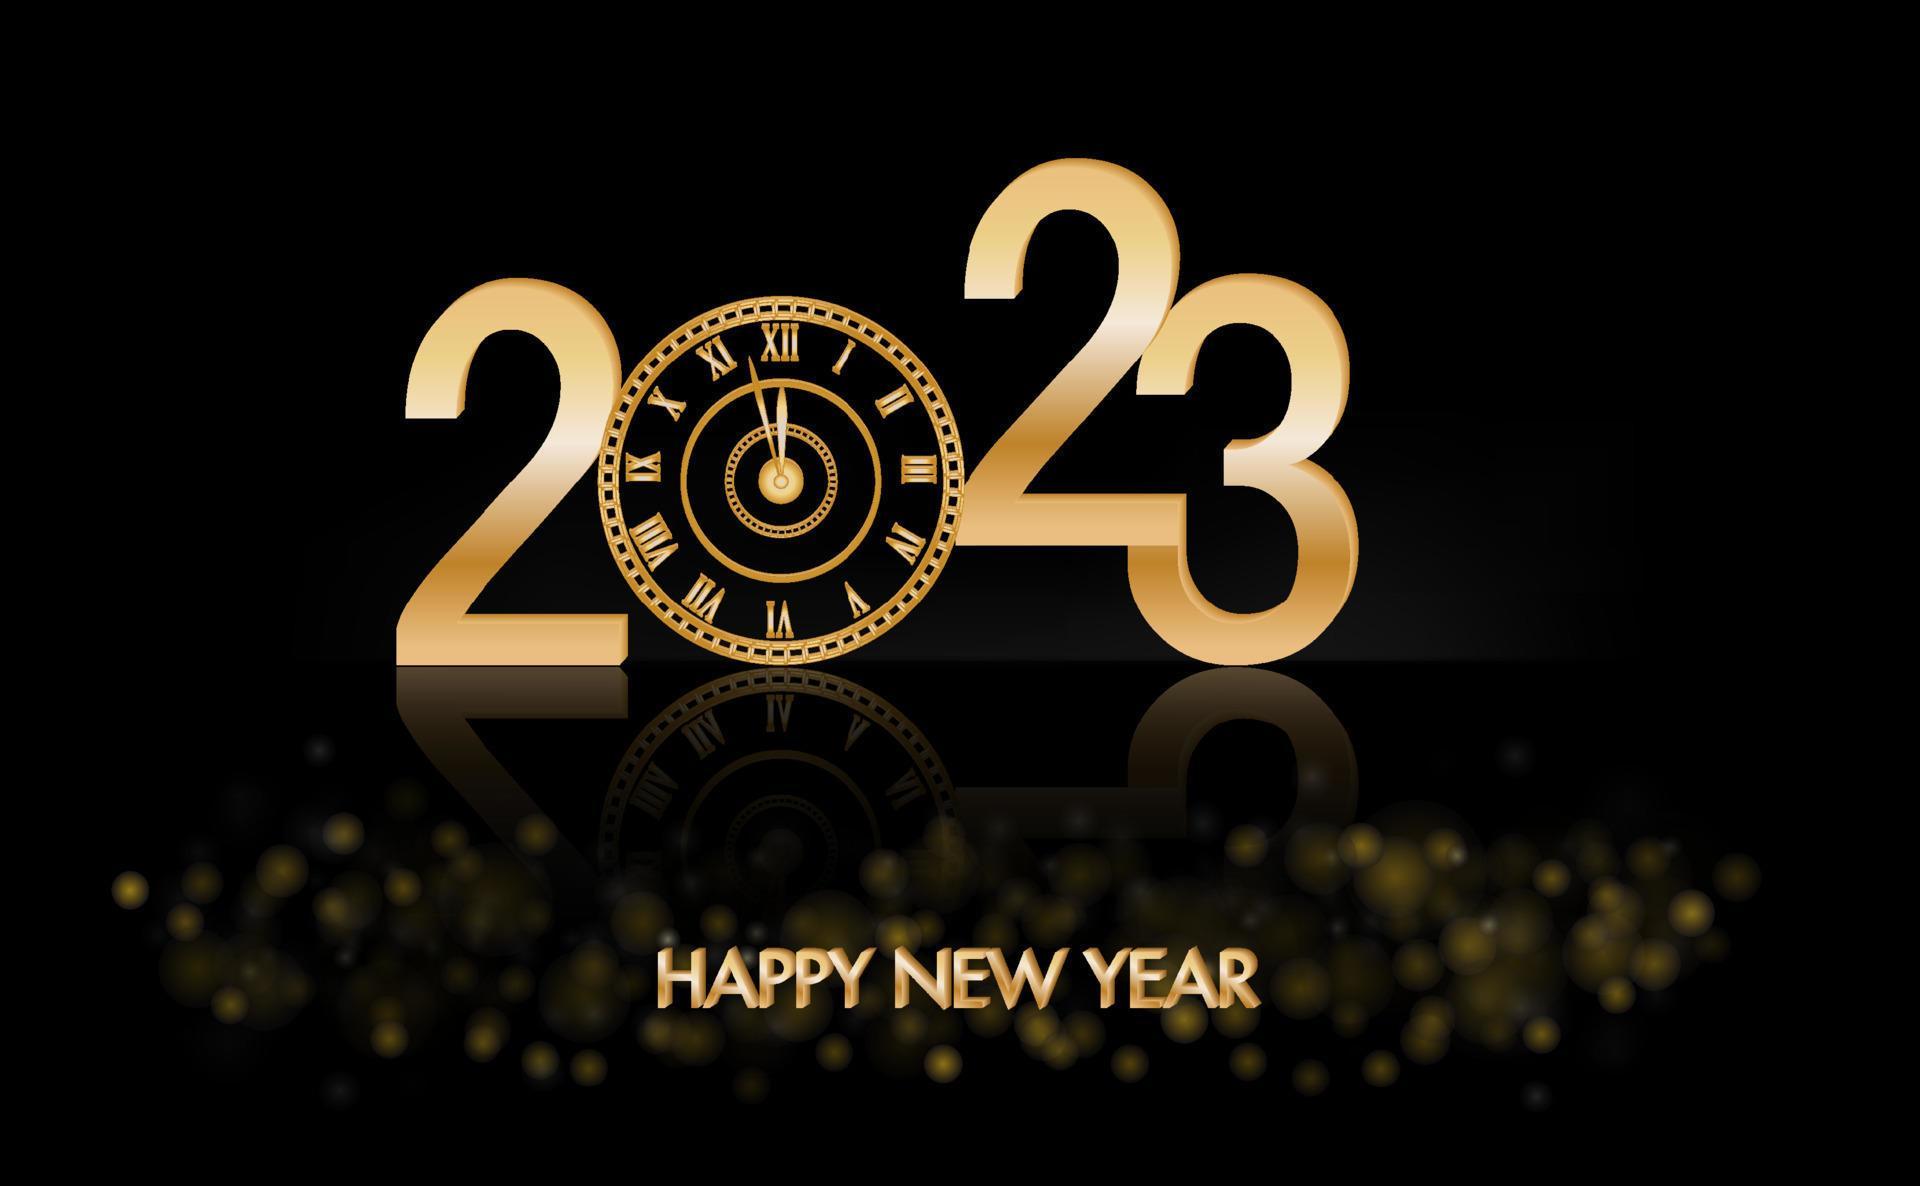 Happy New Year 2023 Image HD HQ Picture Photo Pics Wallpaper Free Download